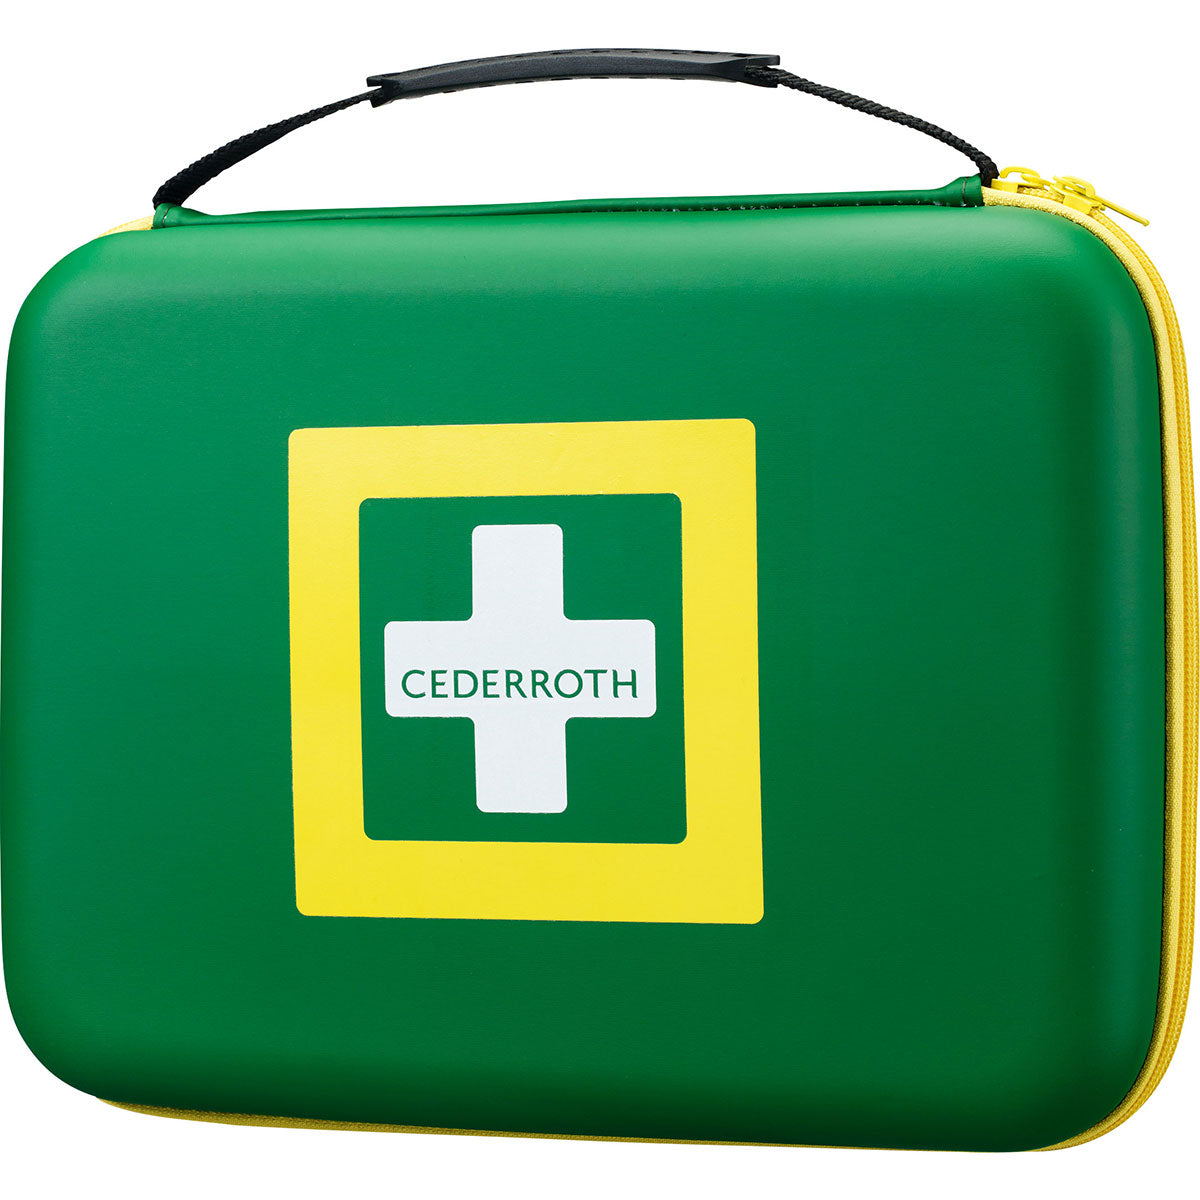 First Aid Kit Large